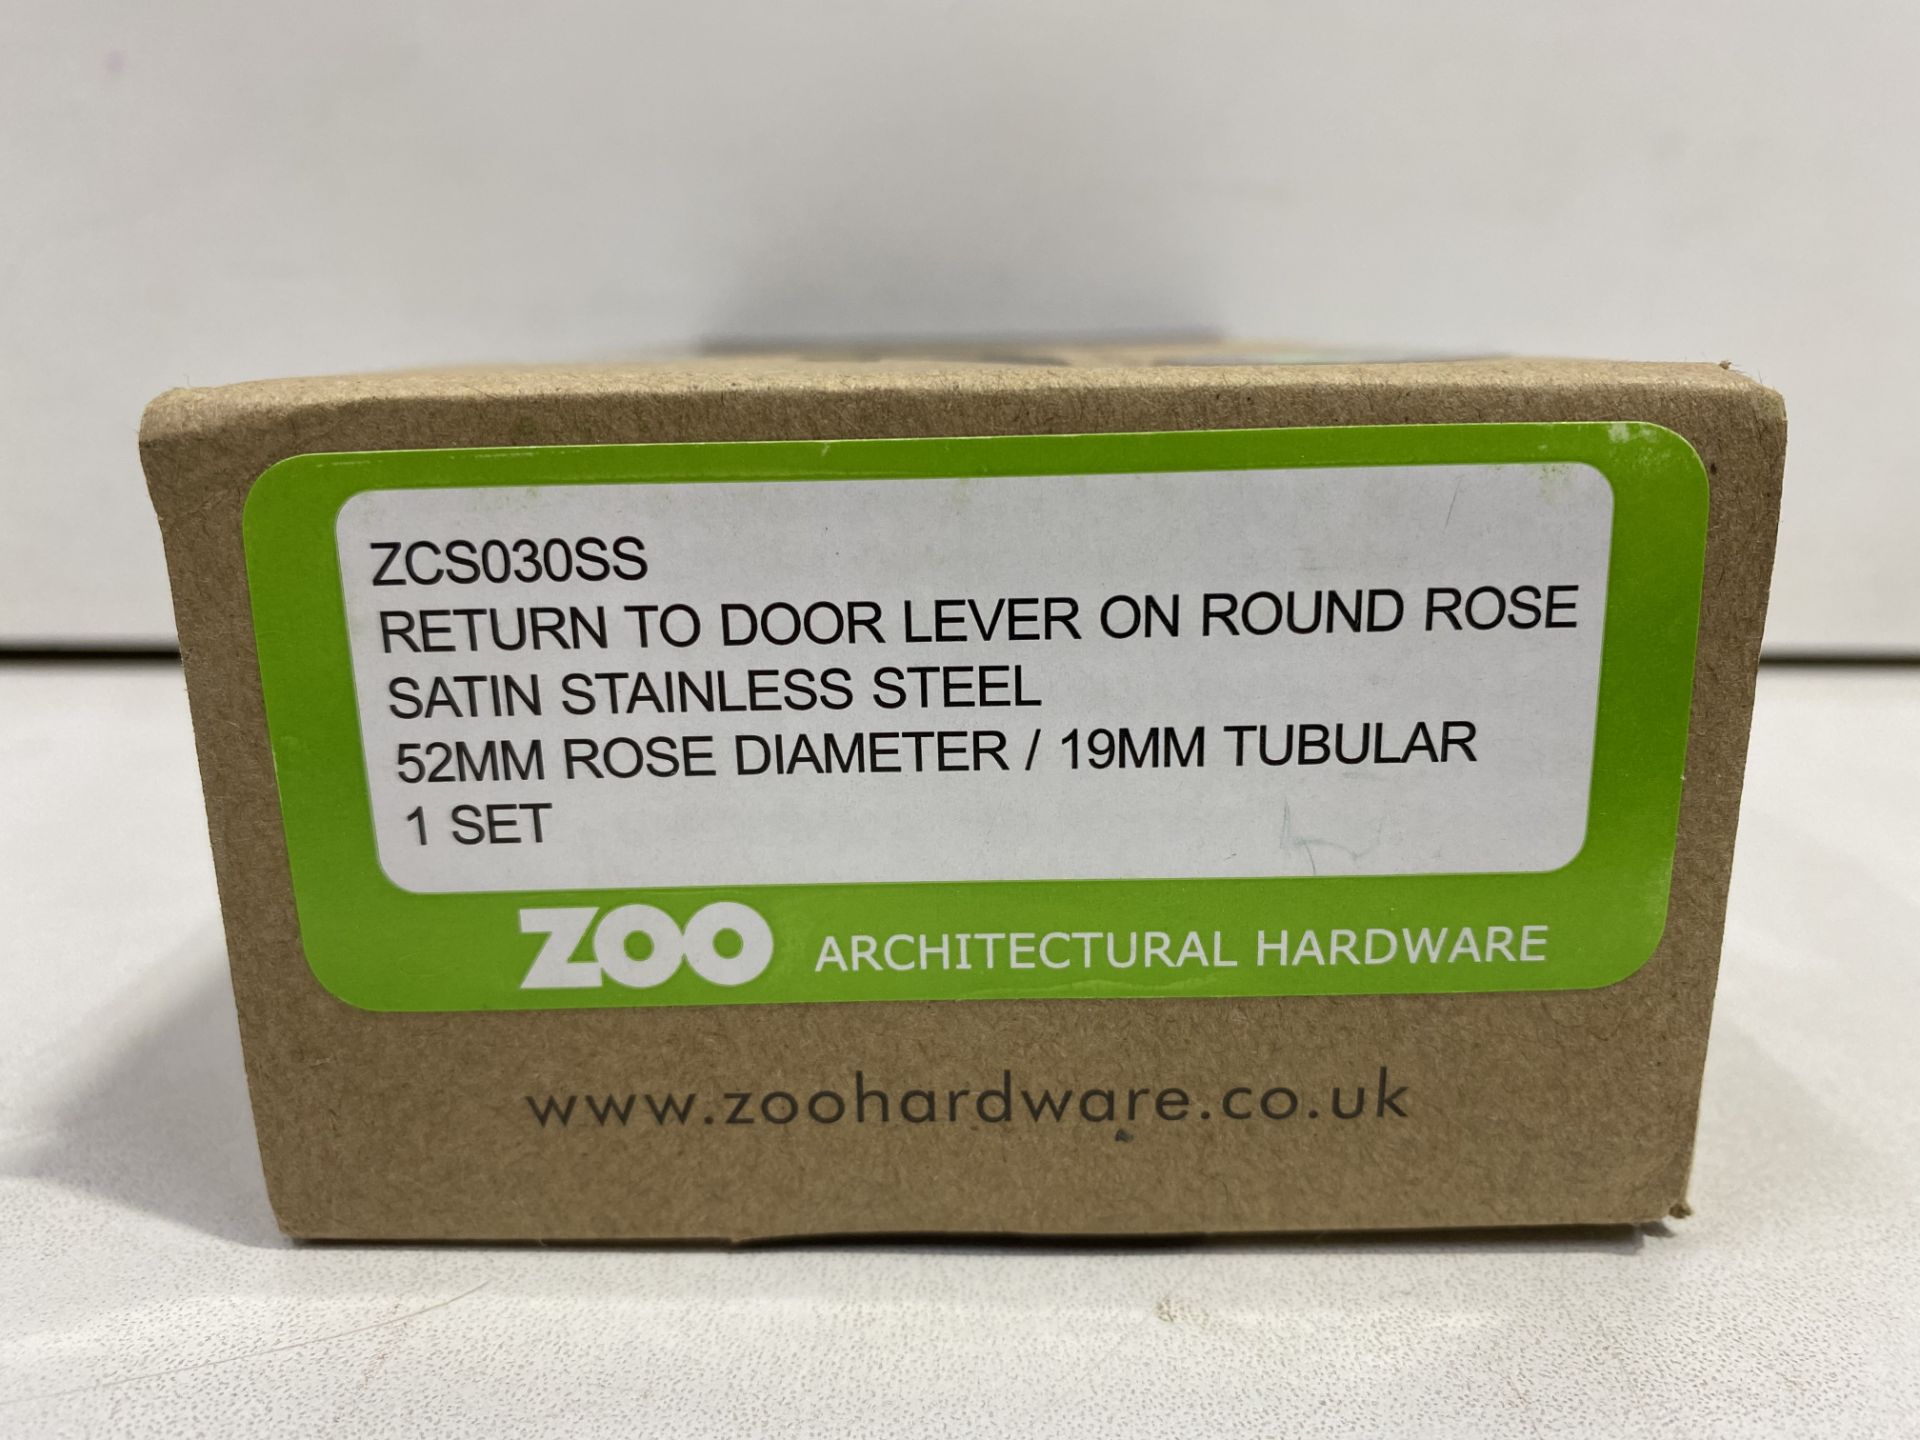 3 x Zoo Hardware ZCS030SS Return To Door Lever On Round Rose Set - Image 3 of 4